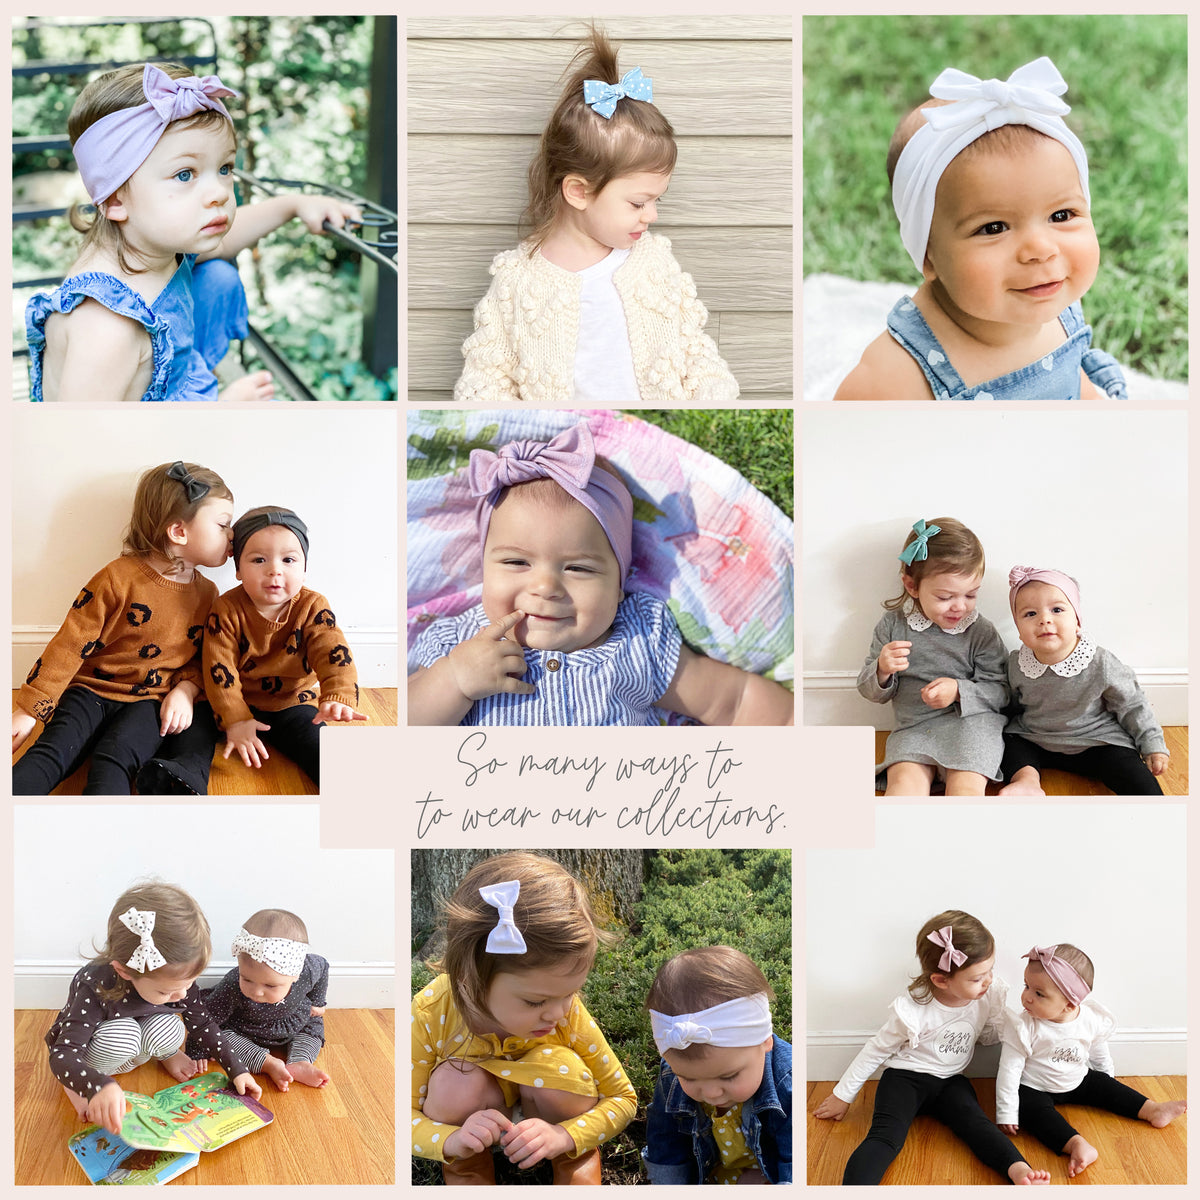 MOMMY AND ME MATCHING BUNDLE - SMALL EMILIA PACK